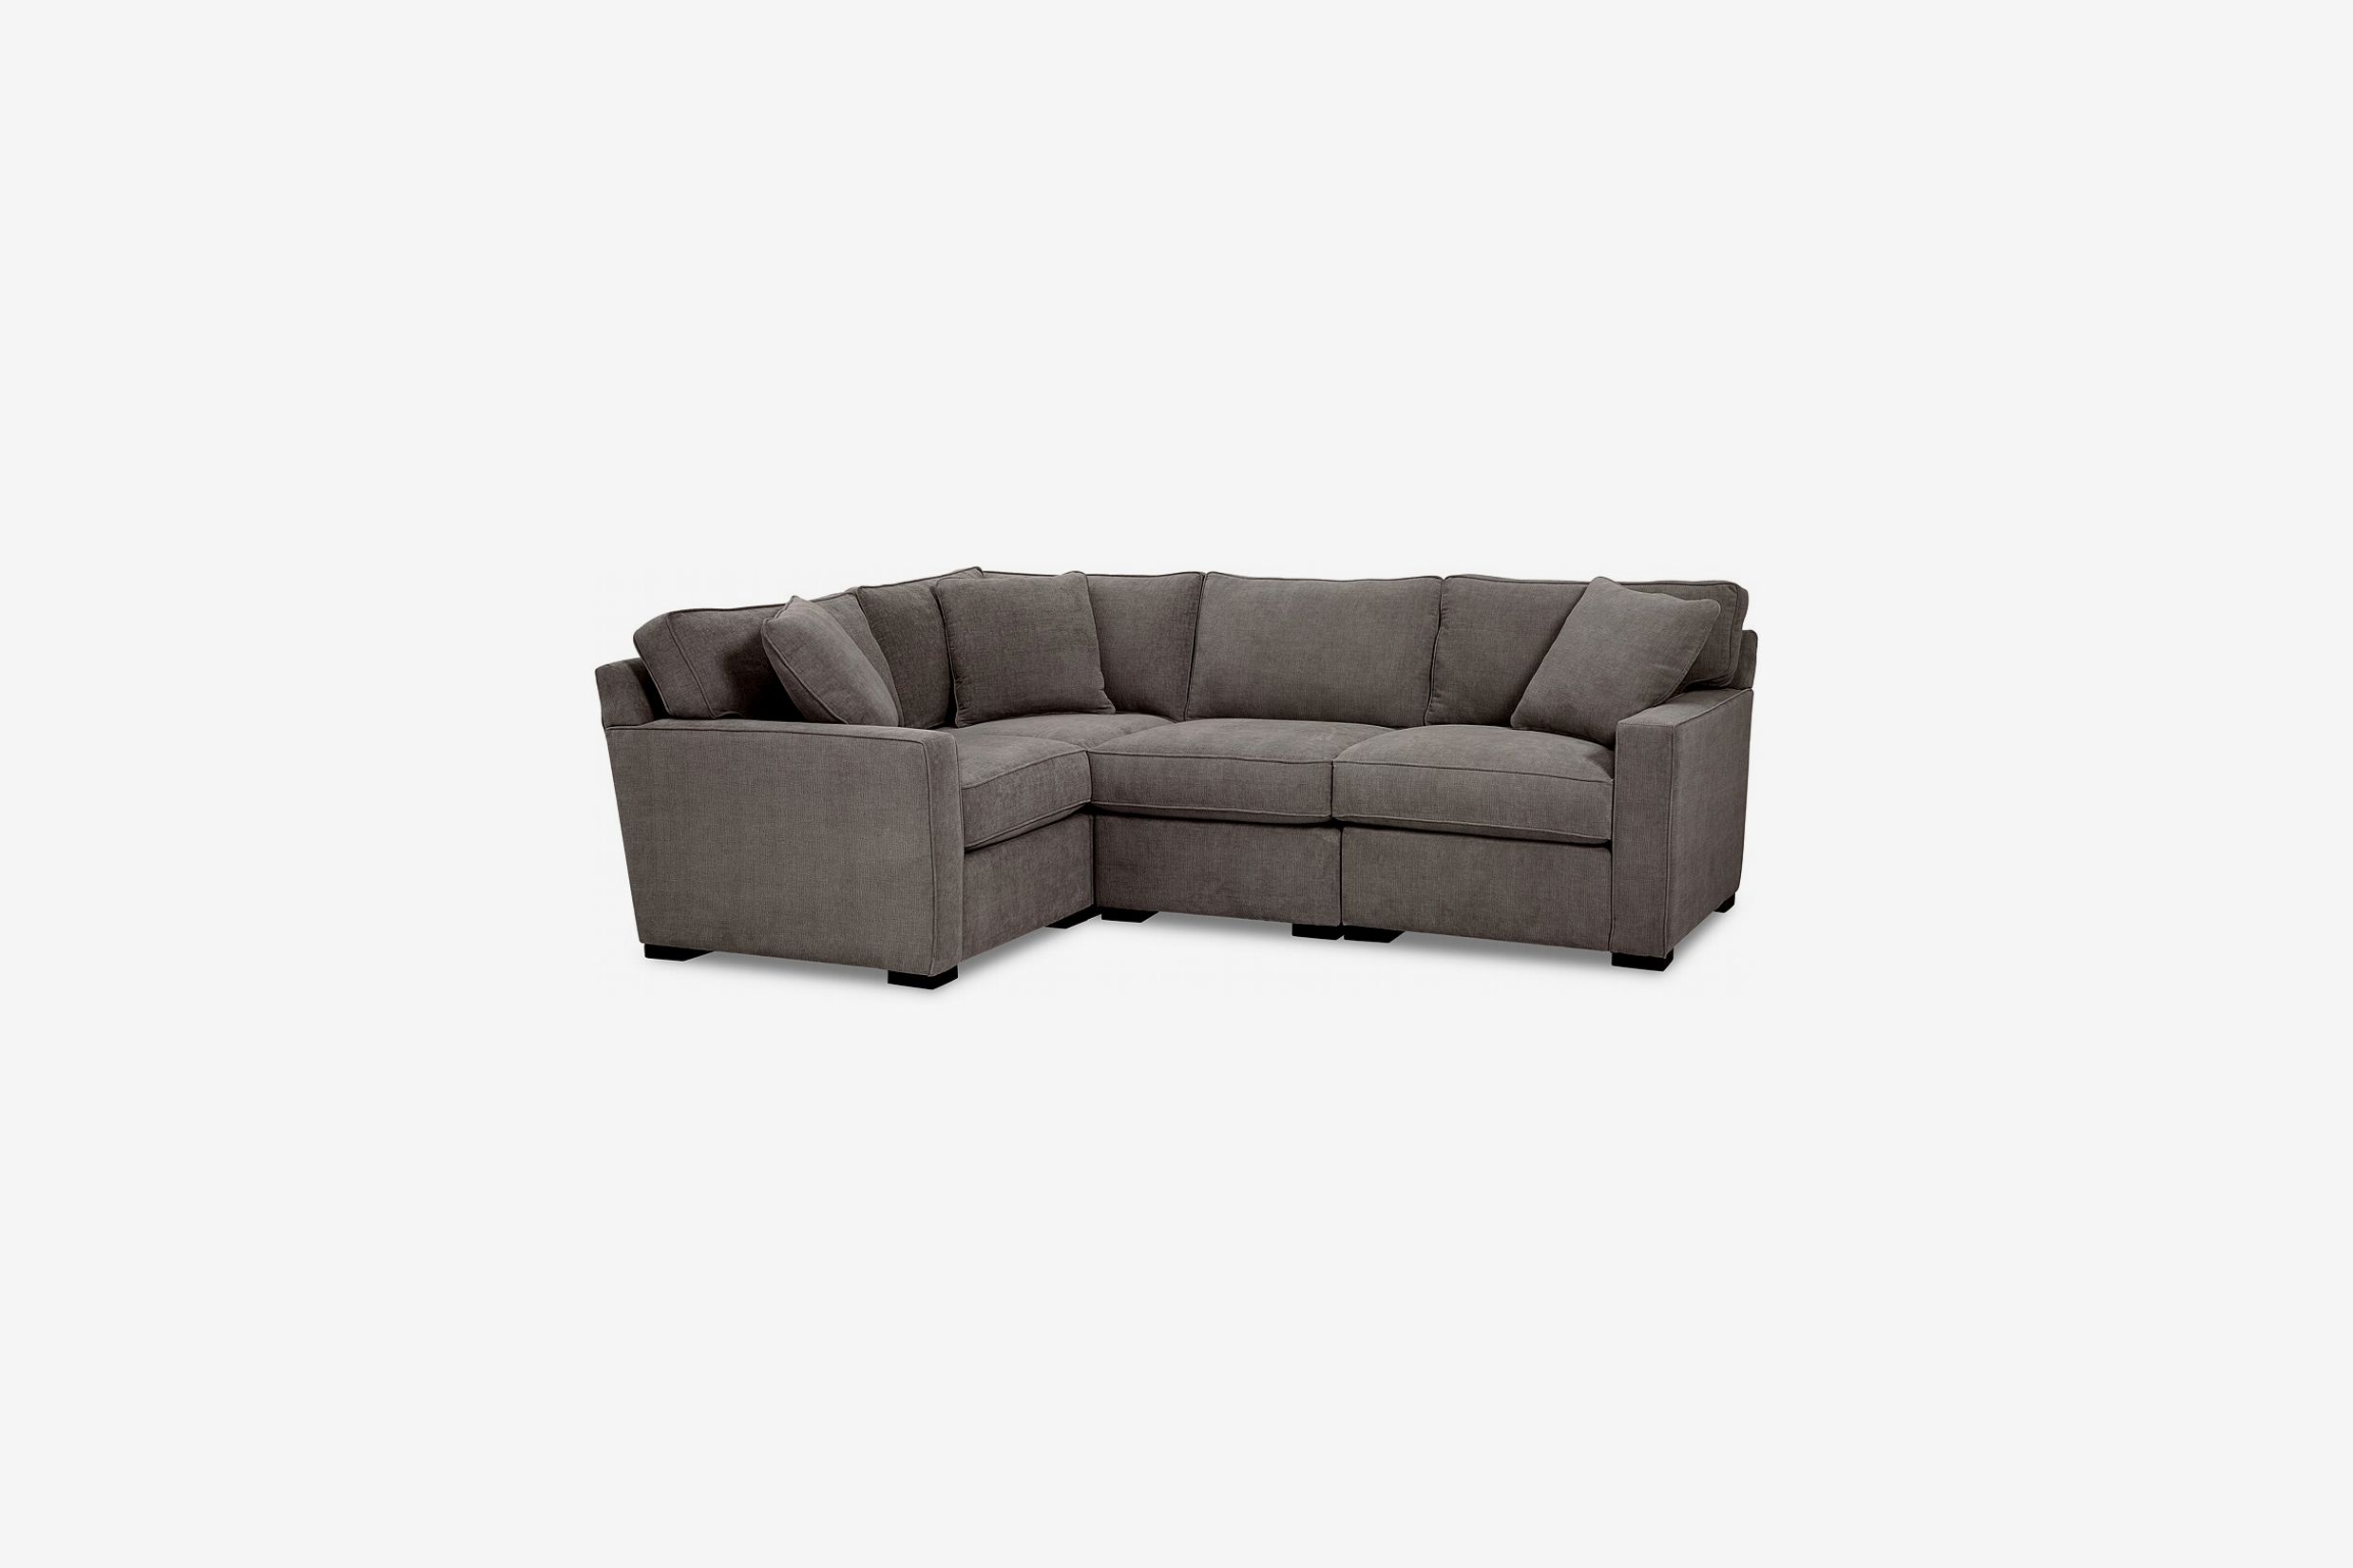 Macy S Radley Sectional Sofa Review